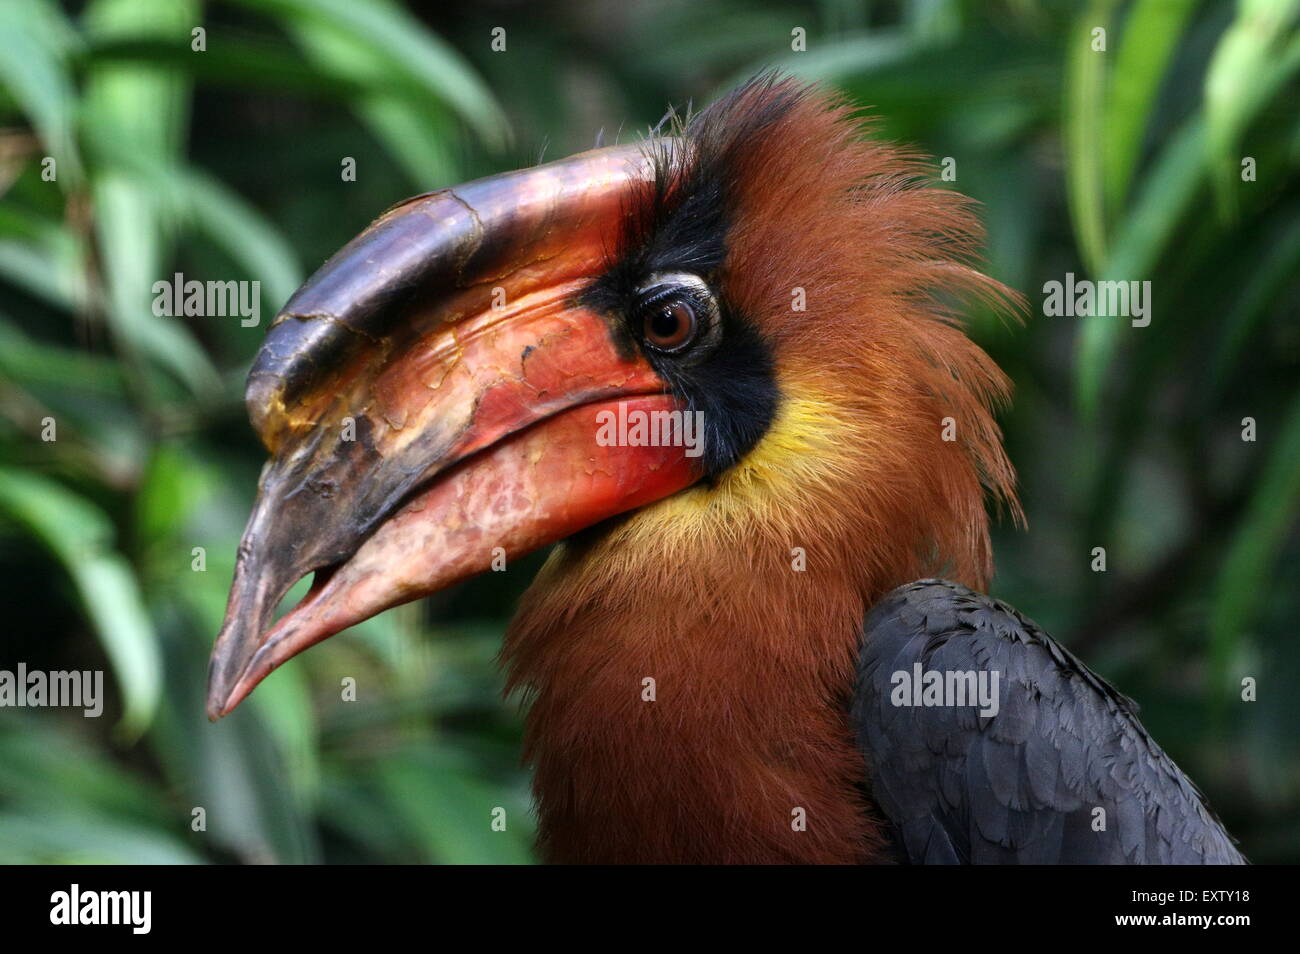 Close-up of the head of a male Asian Rufous hornbill (Buceros hydrocorax), also known as Philippine hornbill Stock Photo